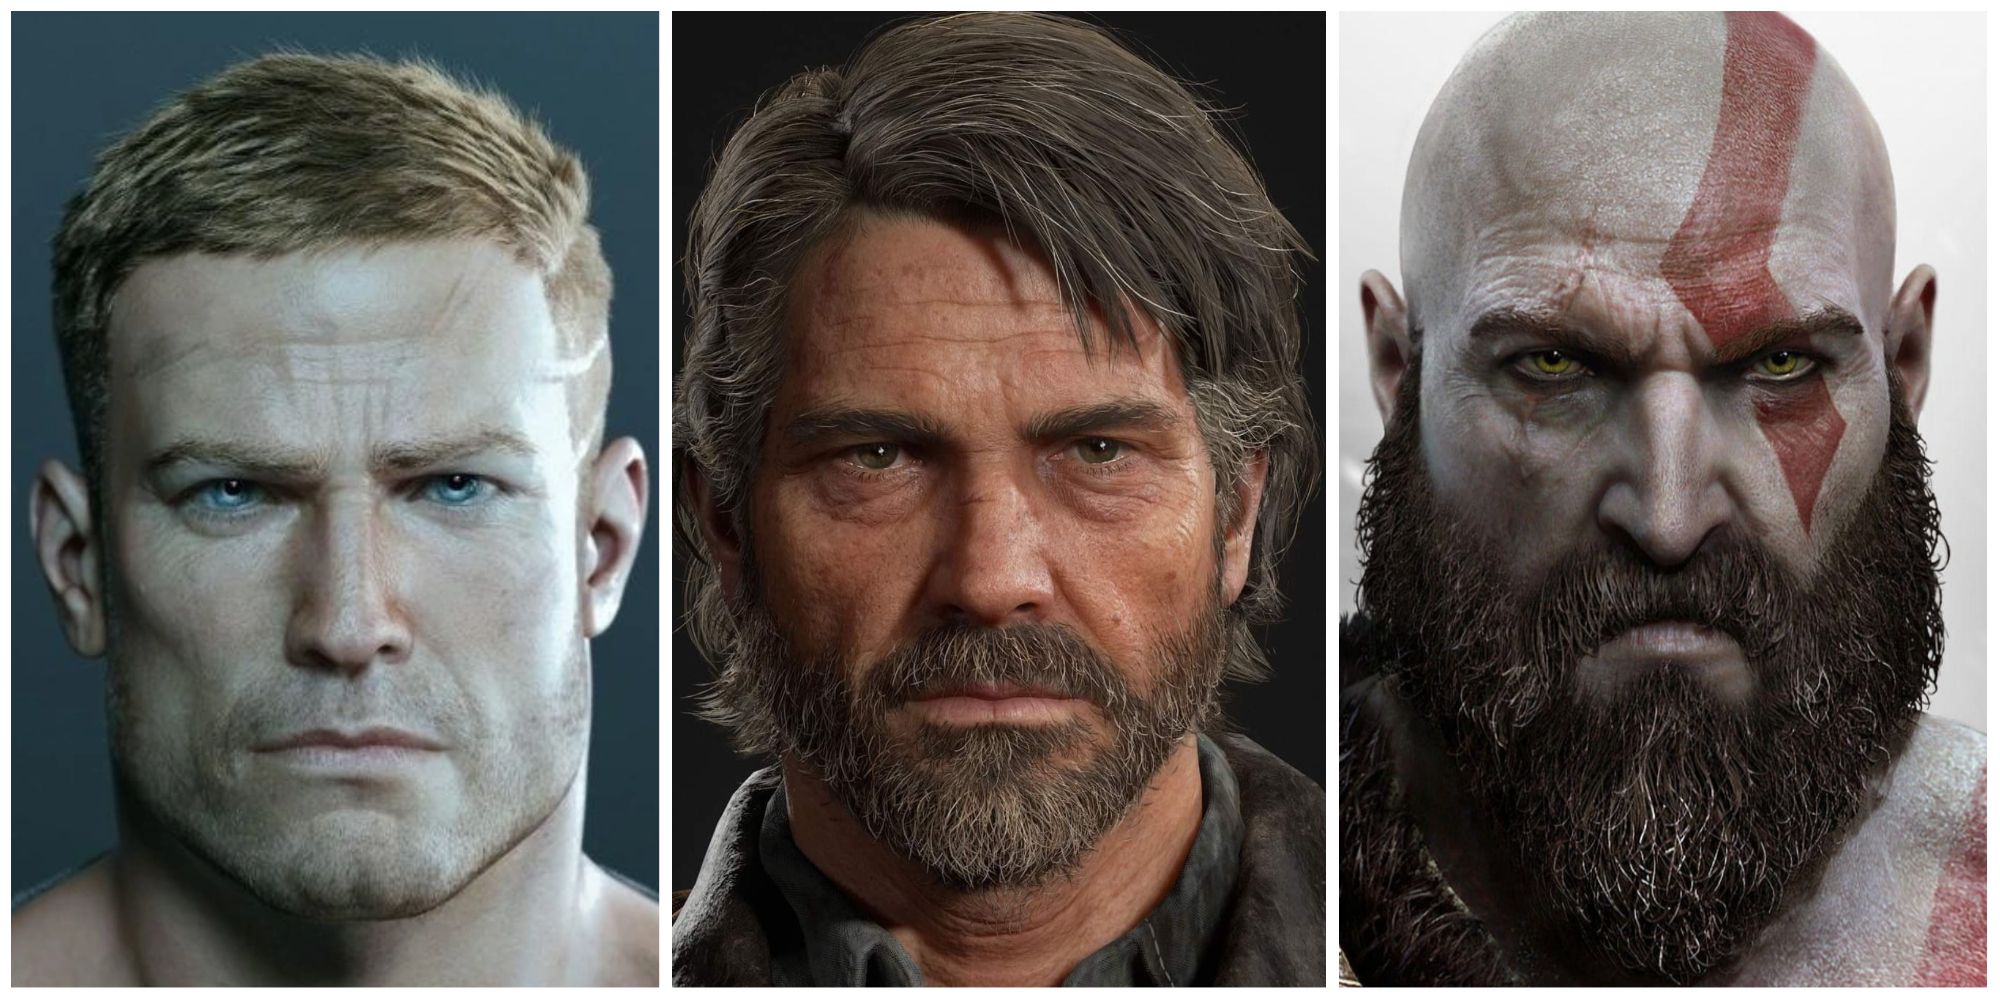 Saddest Dad In Games - BJ from Wolfenstein, Joel from The Last of Us and Kratos from God of War